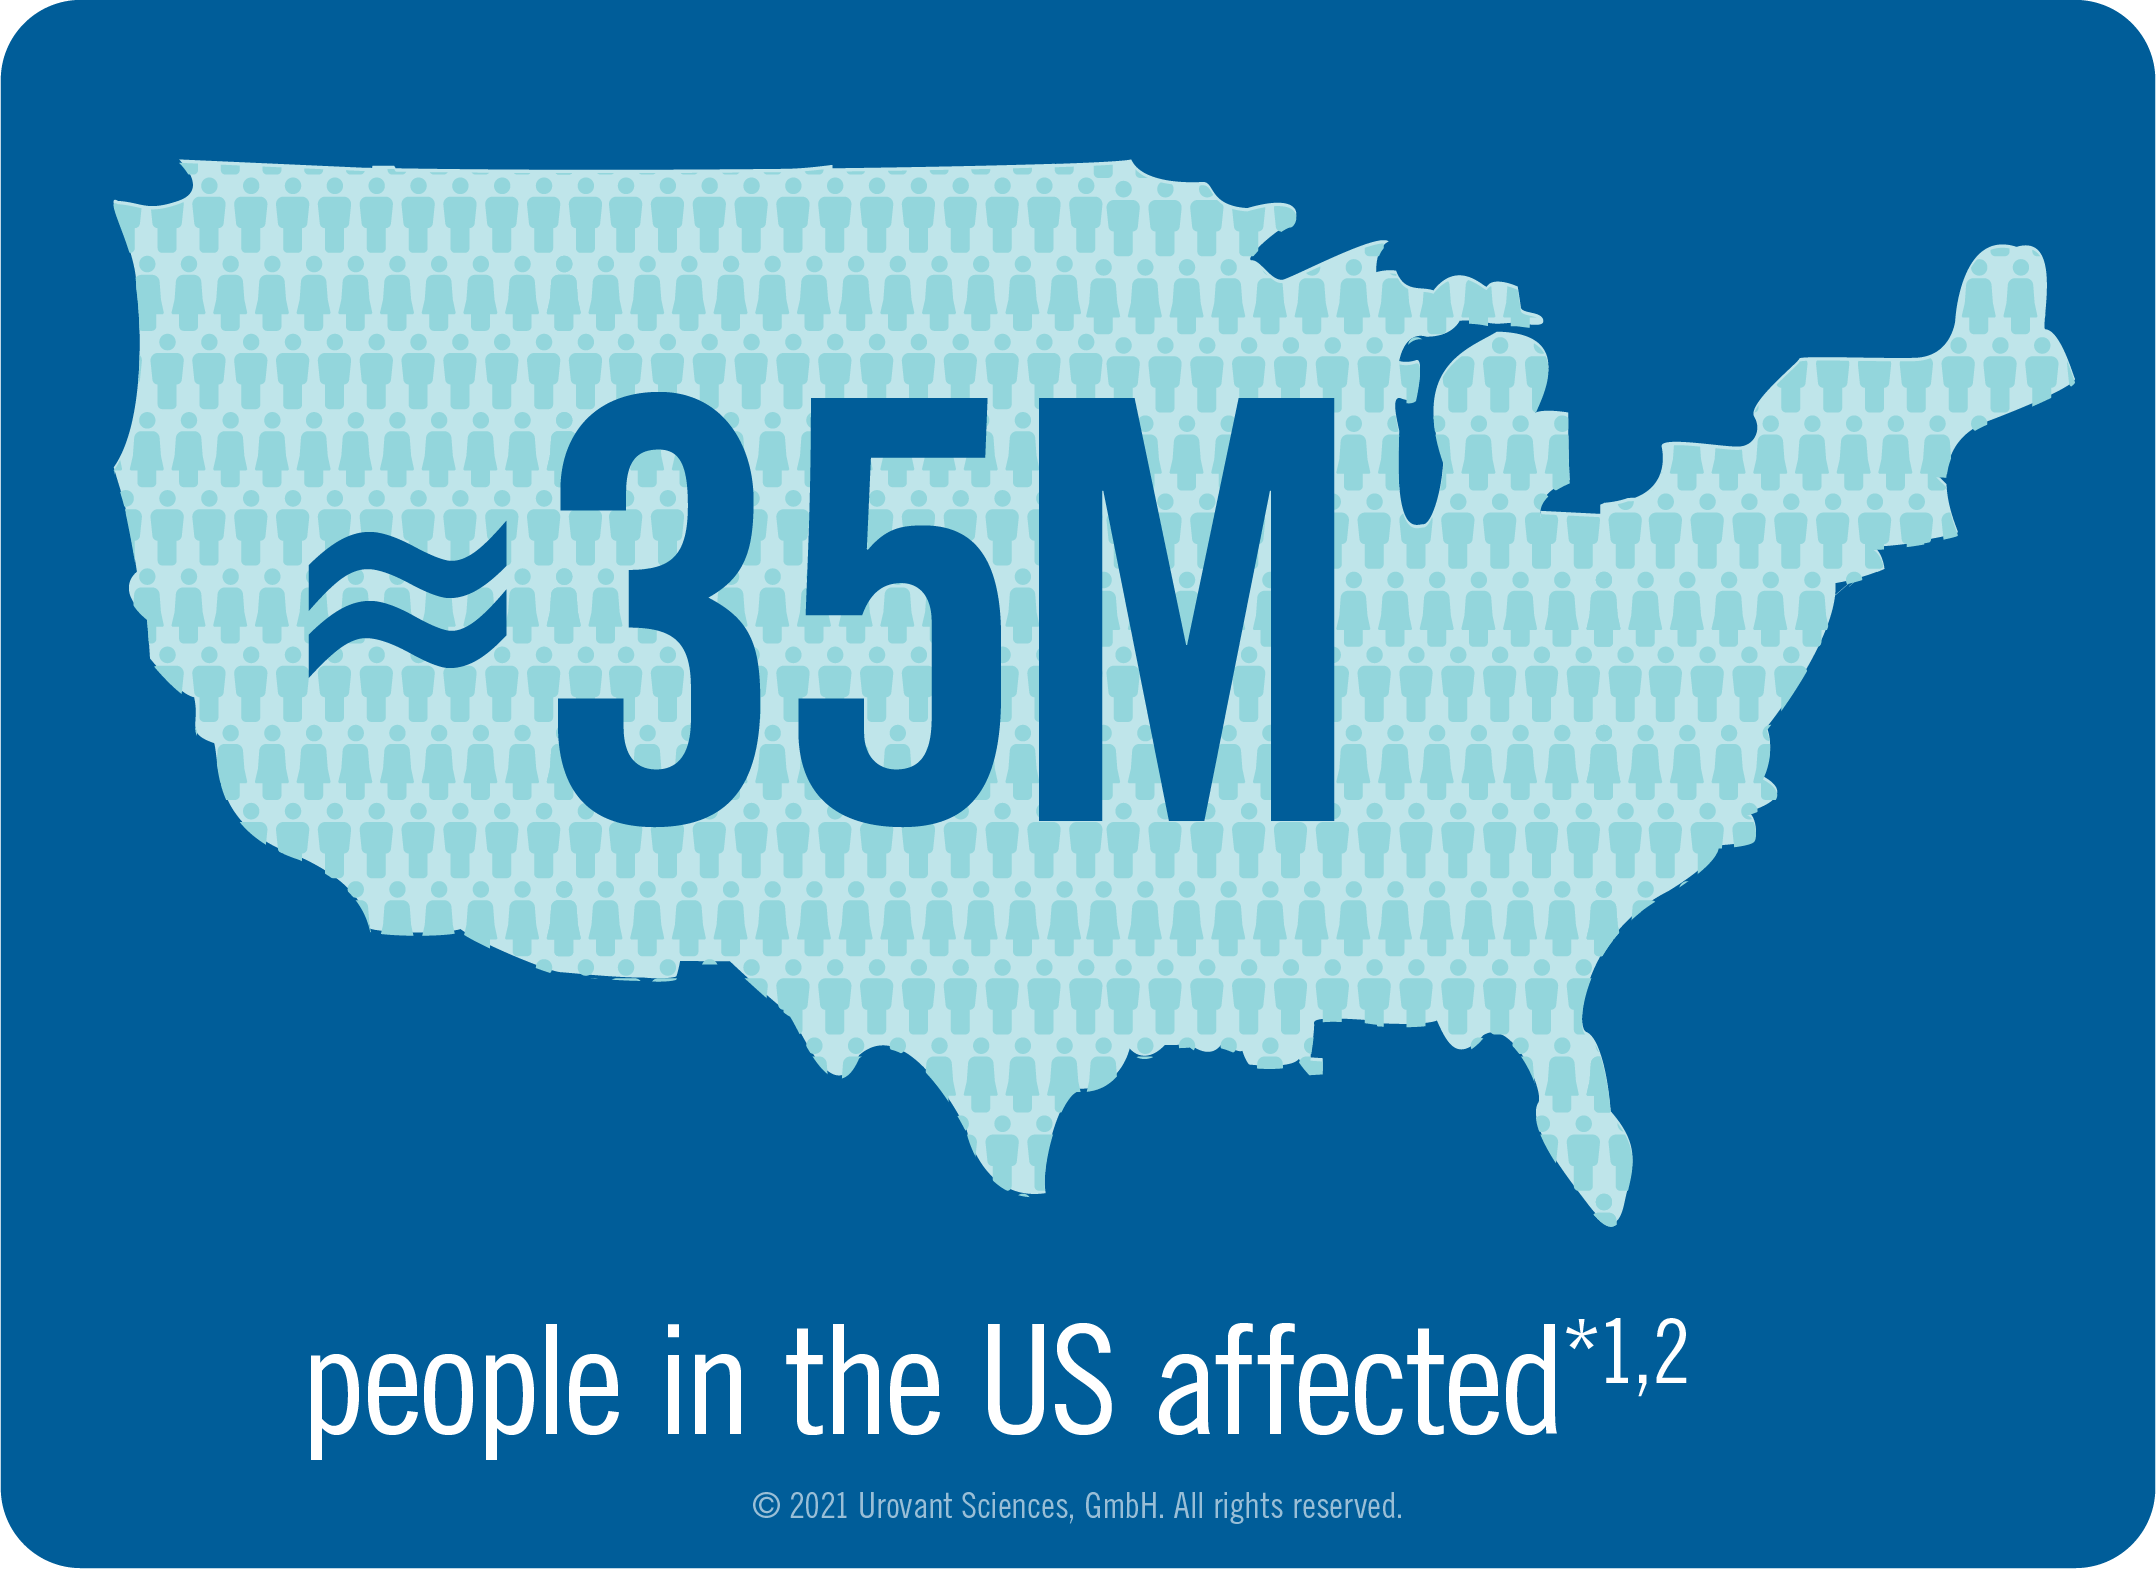 Infographic of U.S. map of 35 million people in US affected by overactive bladder